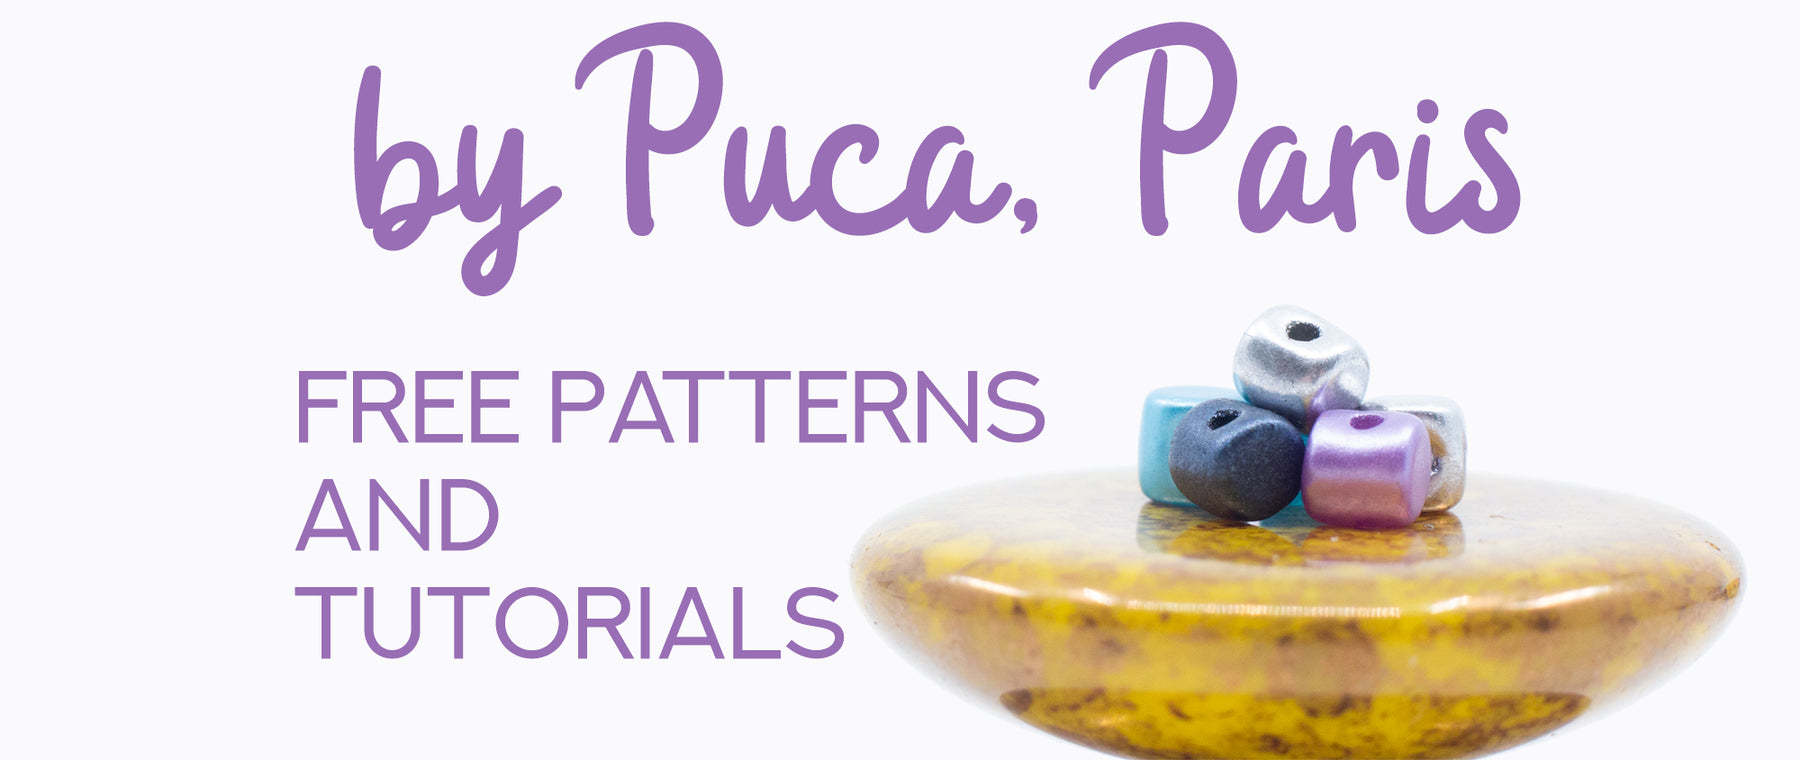 Free Patterns and Tutorials From Les perles par Puca®